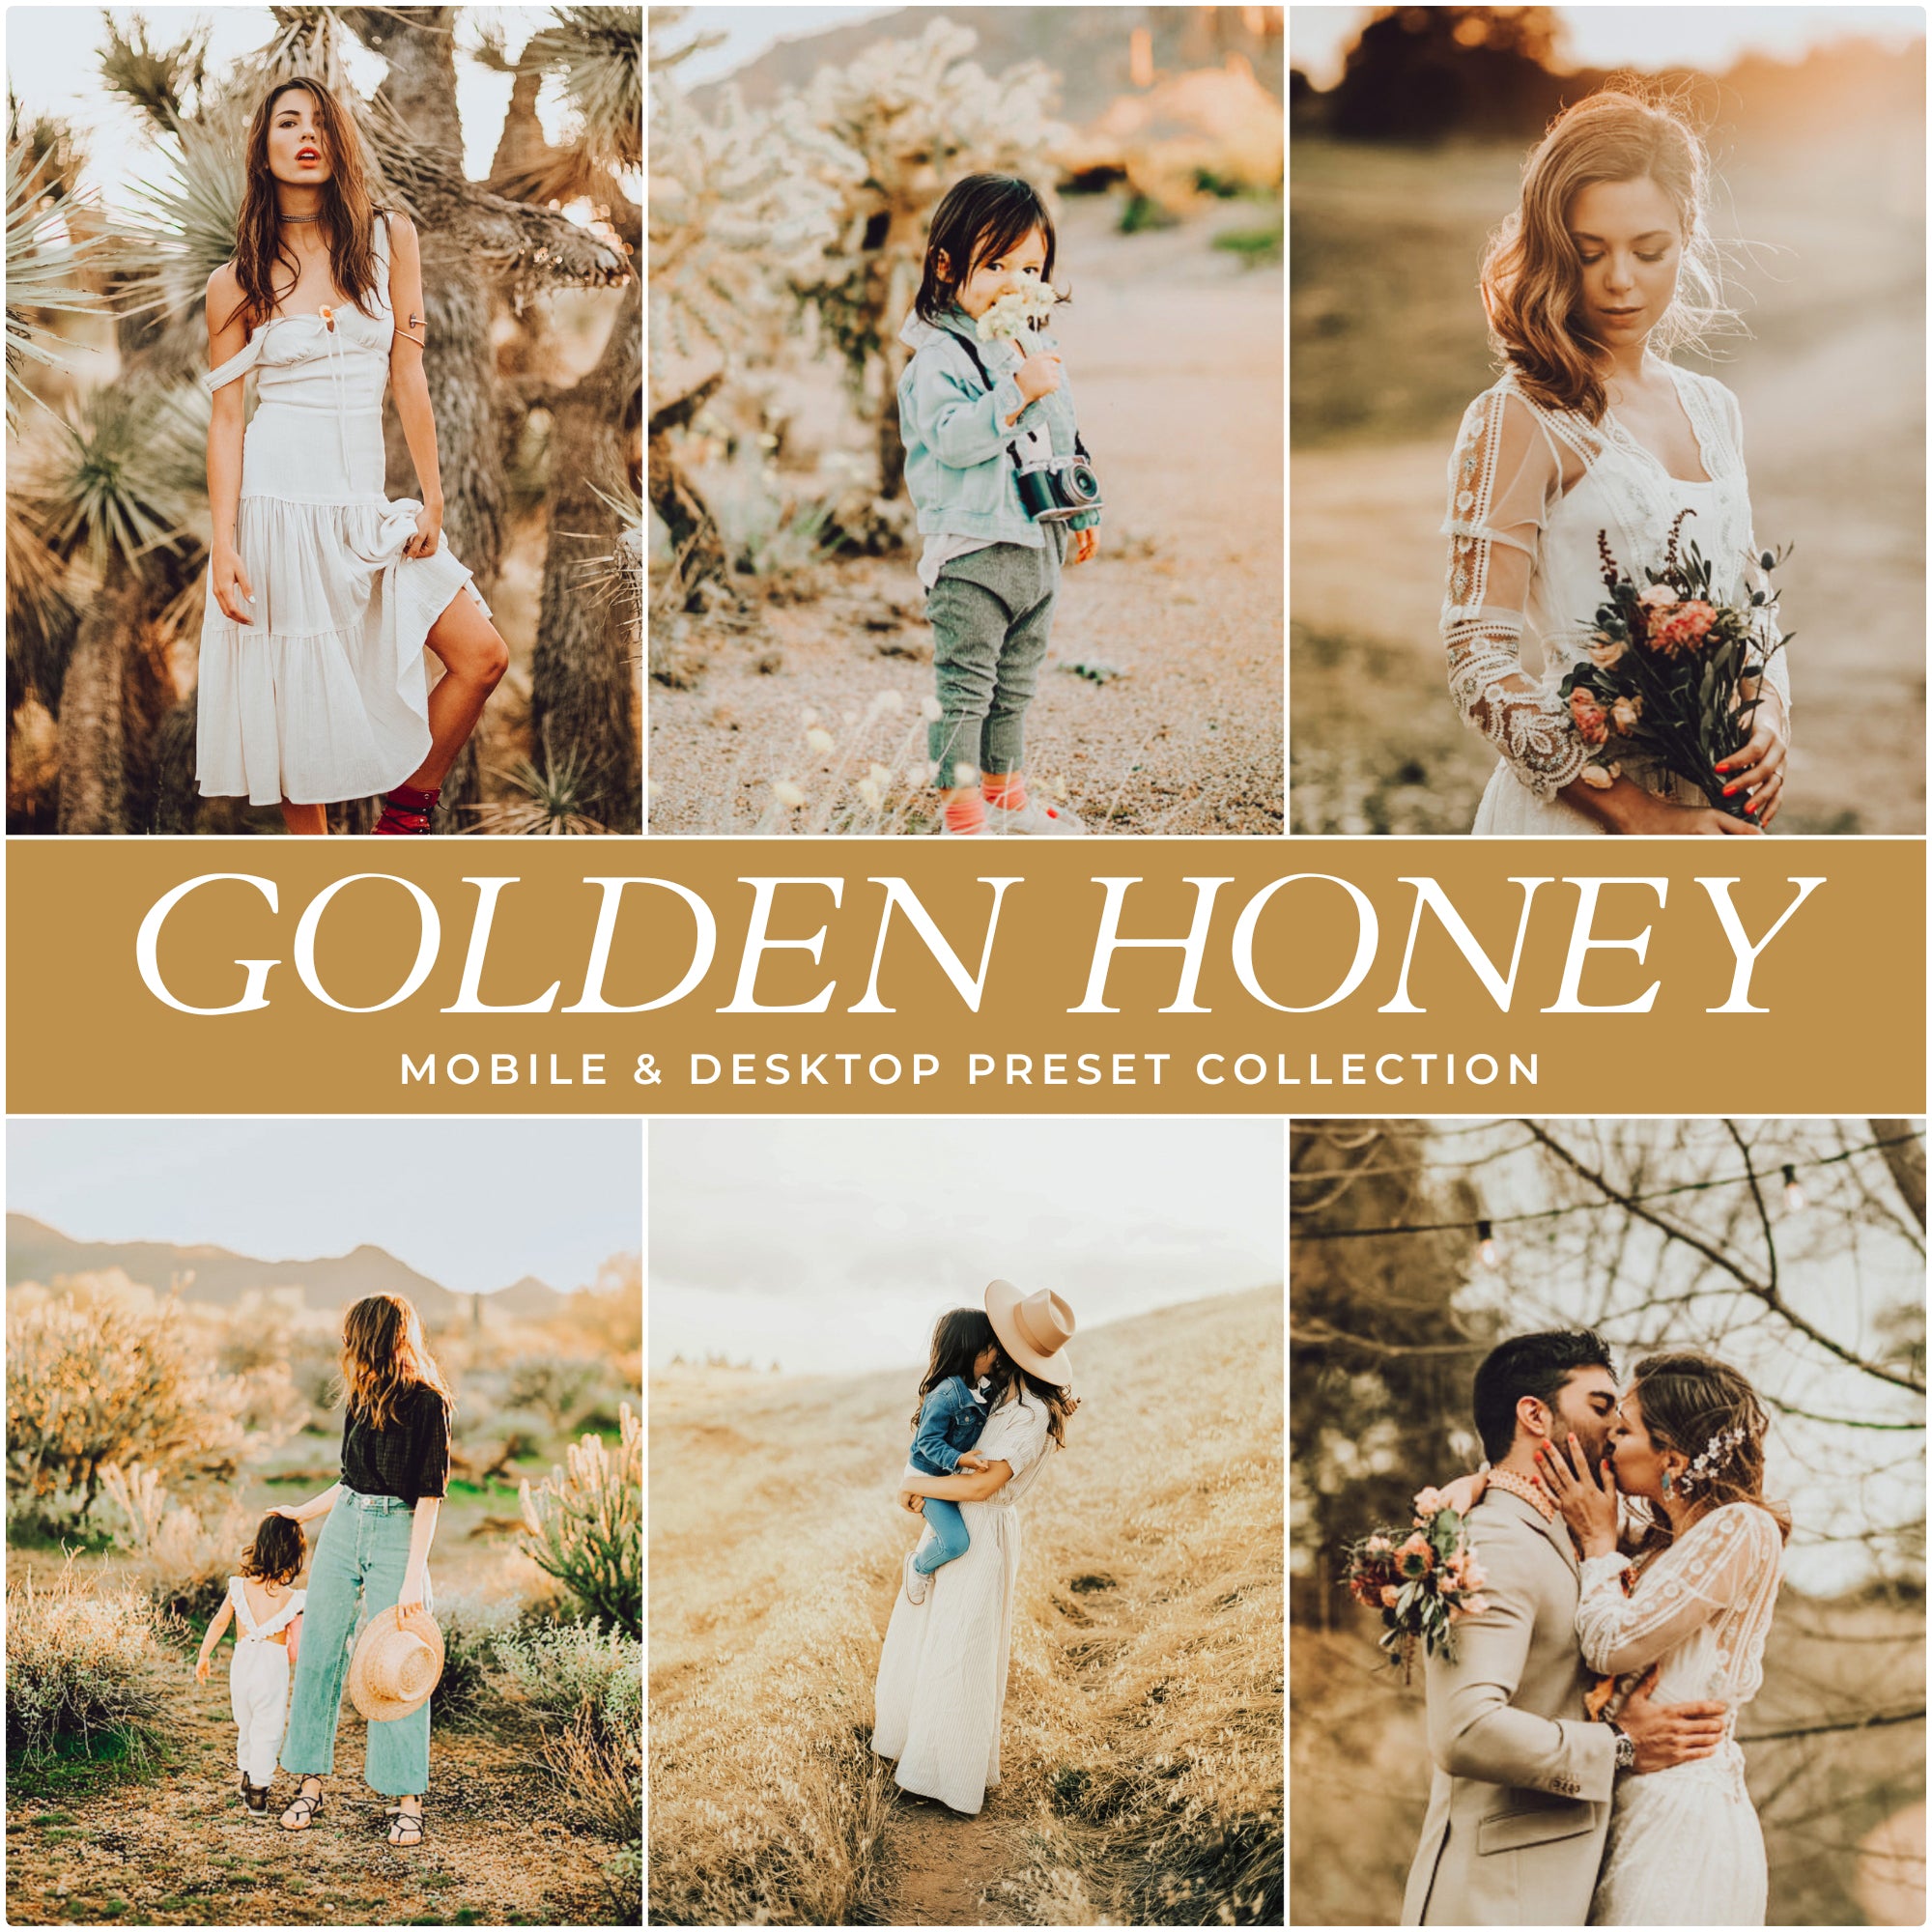 Golden Honey Lightroom Presets For Photographers and Instagram Influencers Photo Editing In Adobe Lightroom By Lou And Marks Presets